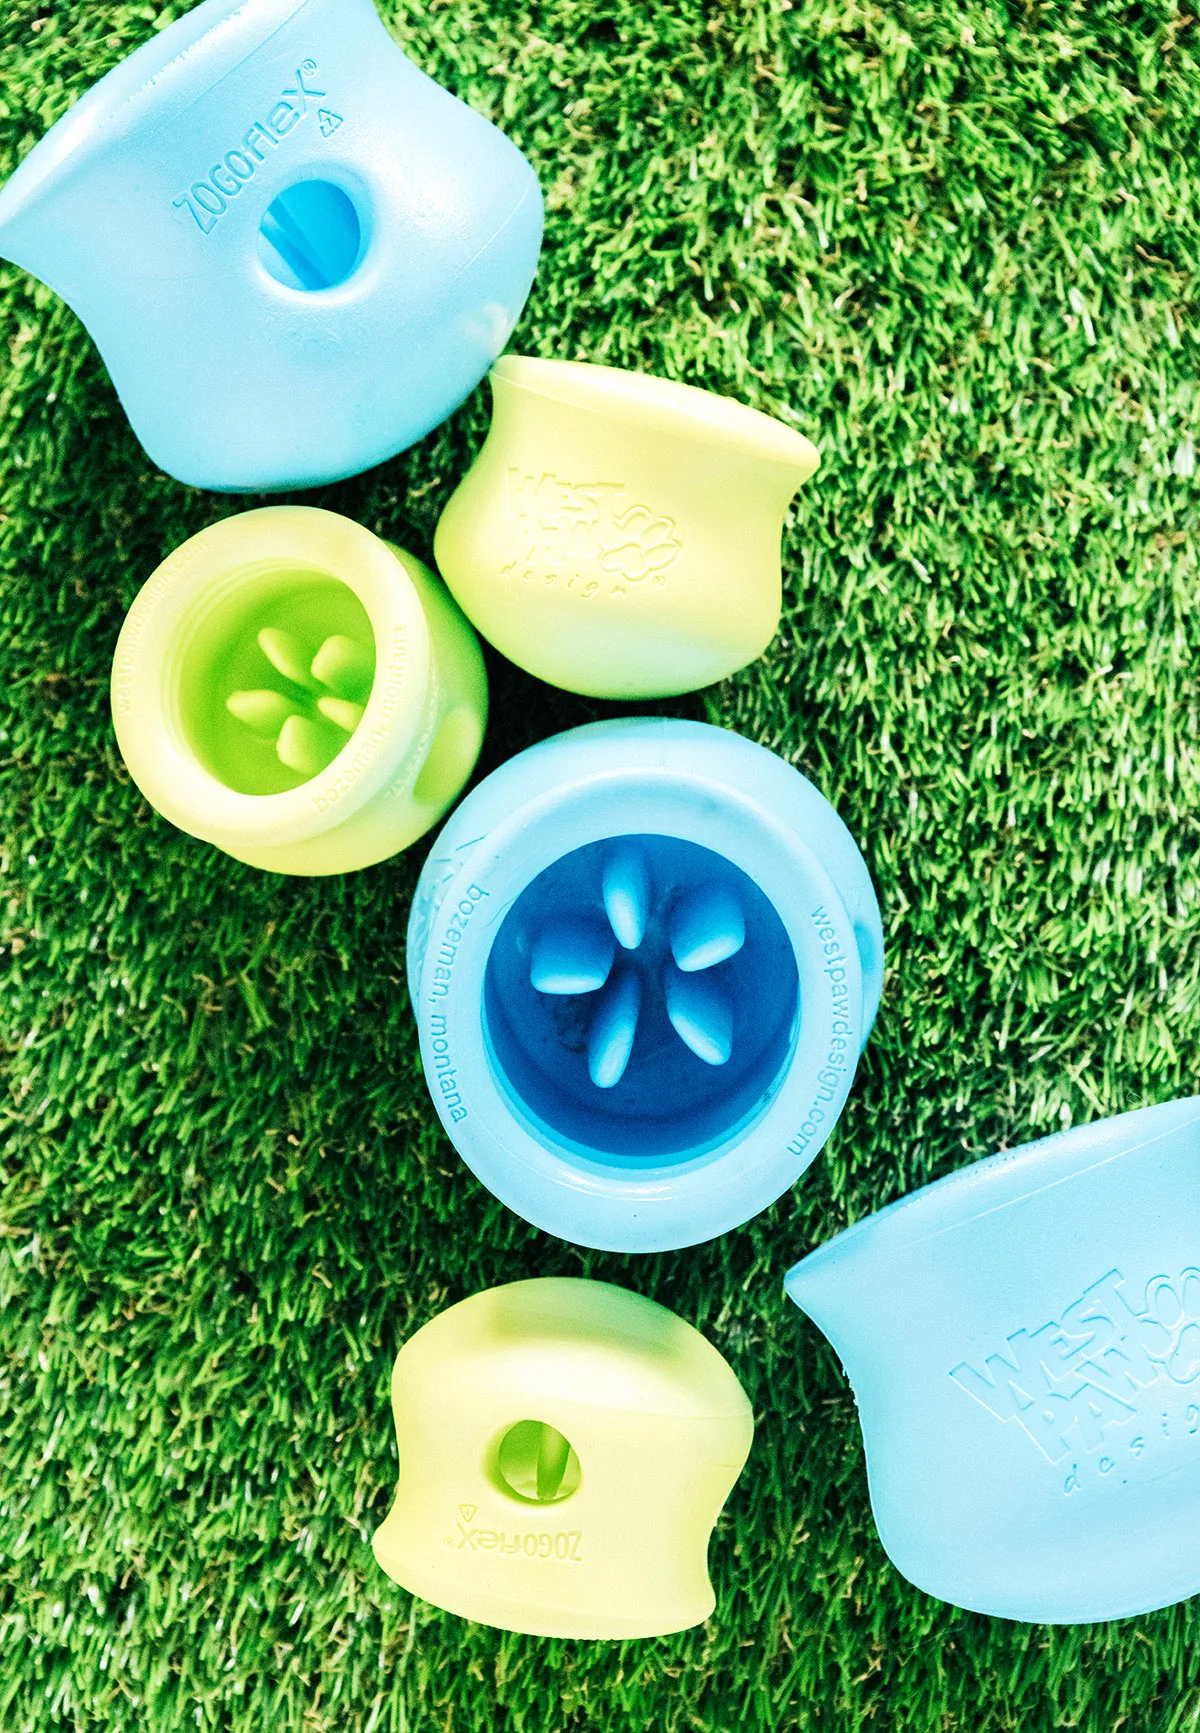 Blue and green toppls in small and large sizes laying on grass.